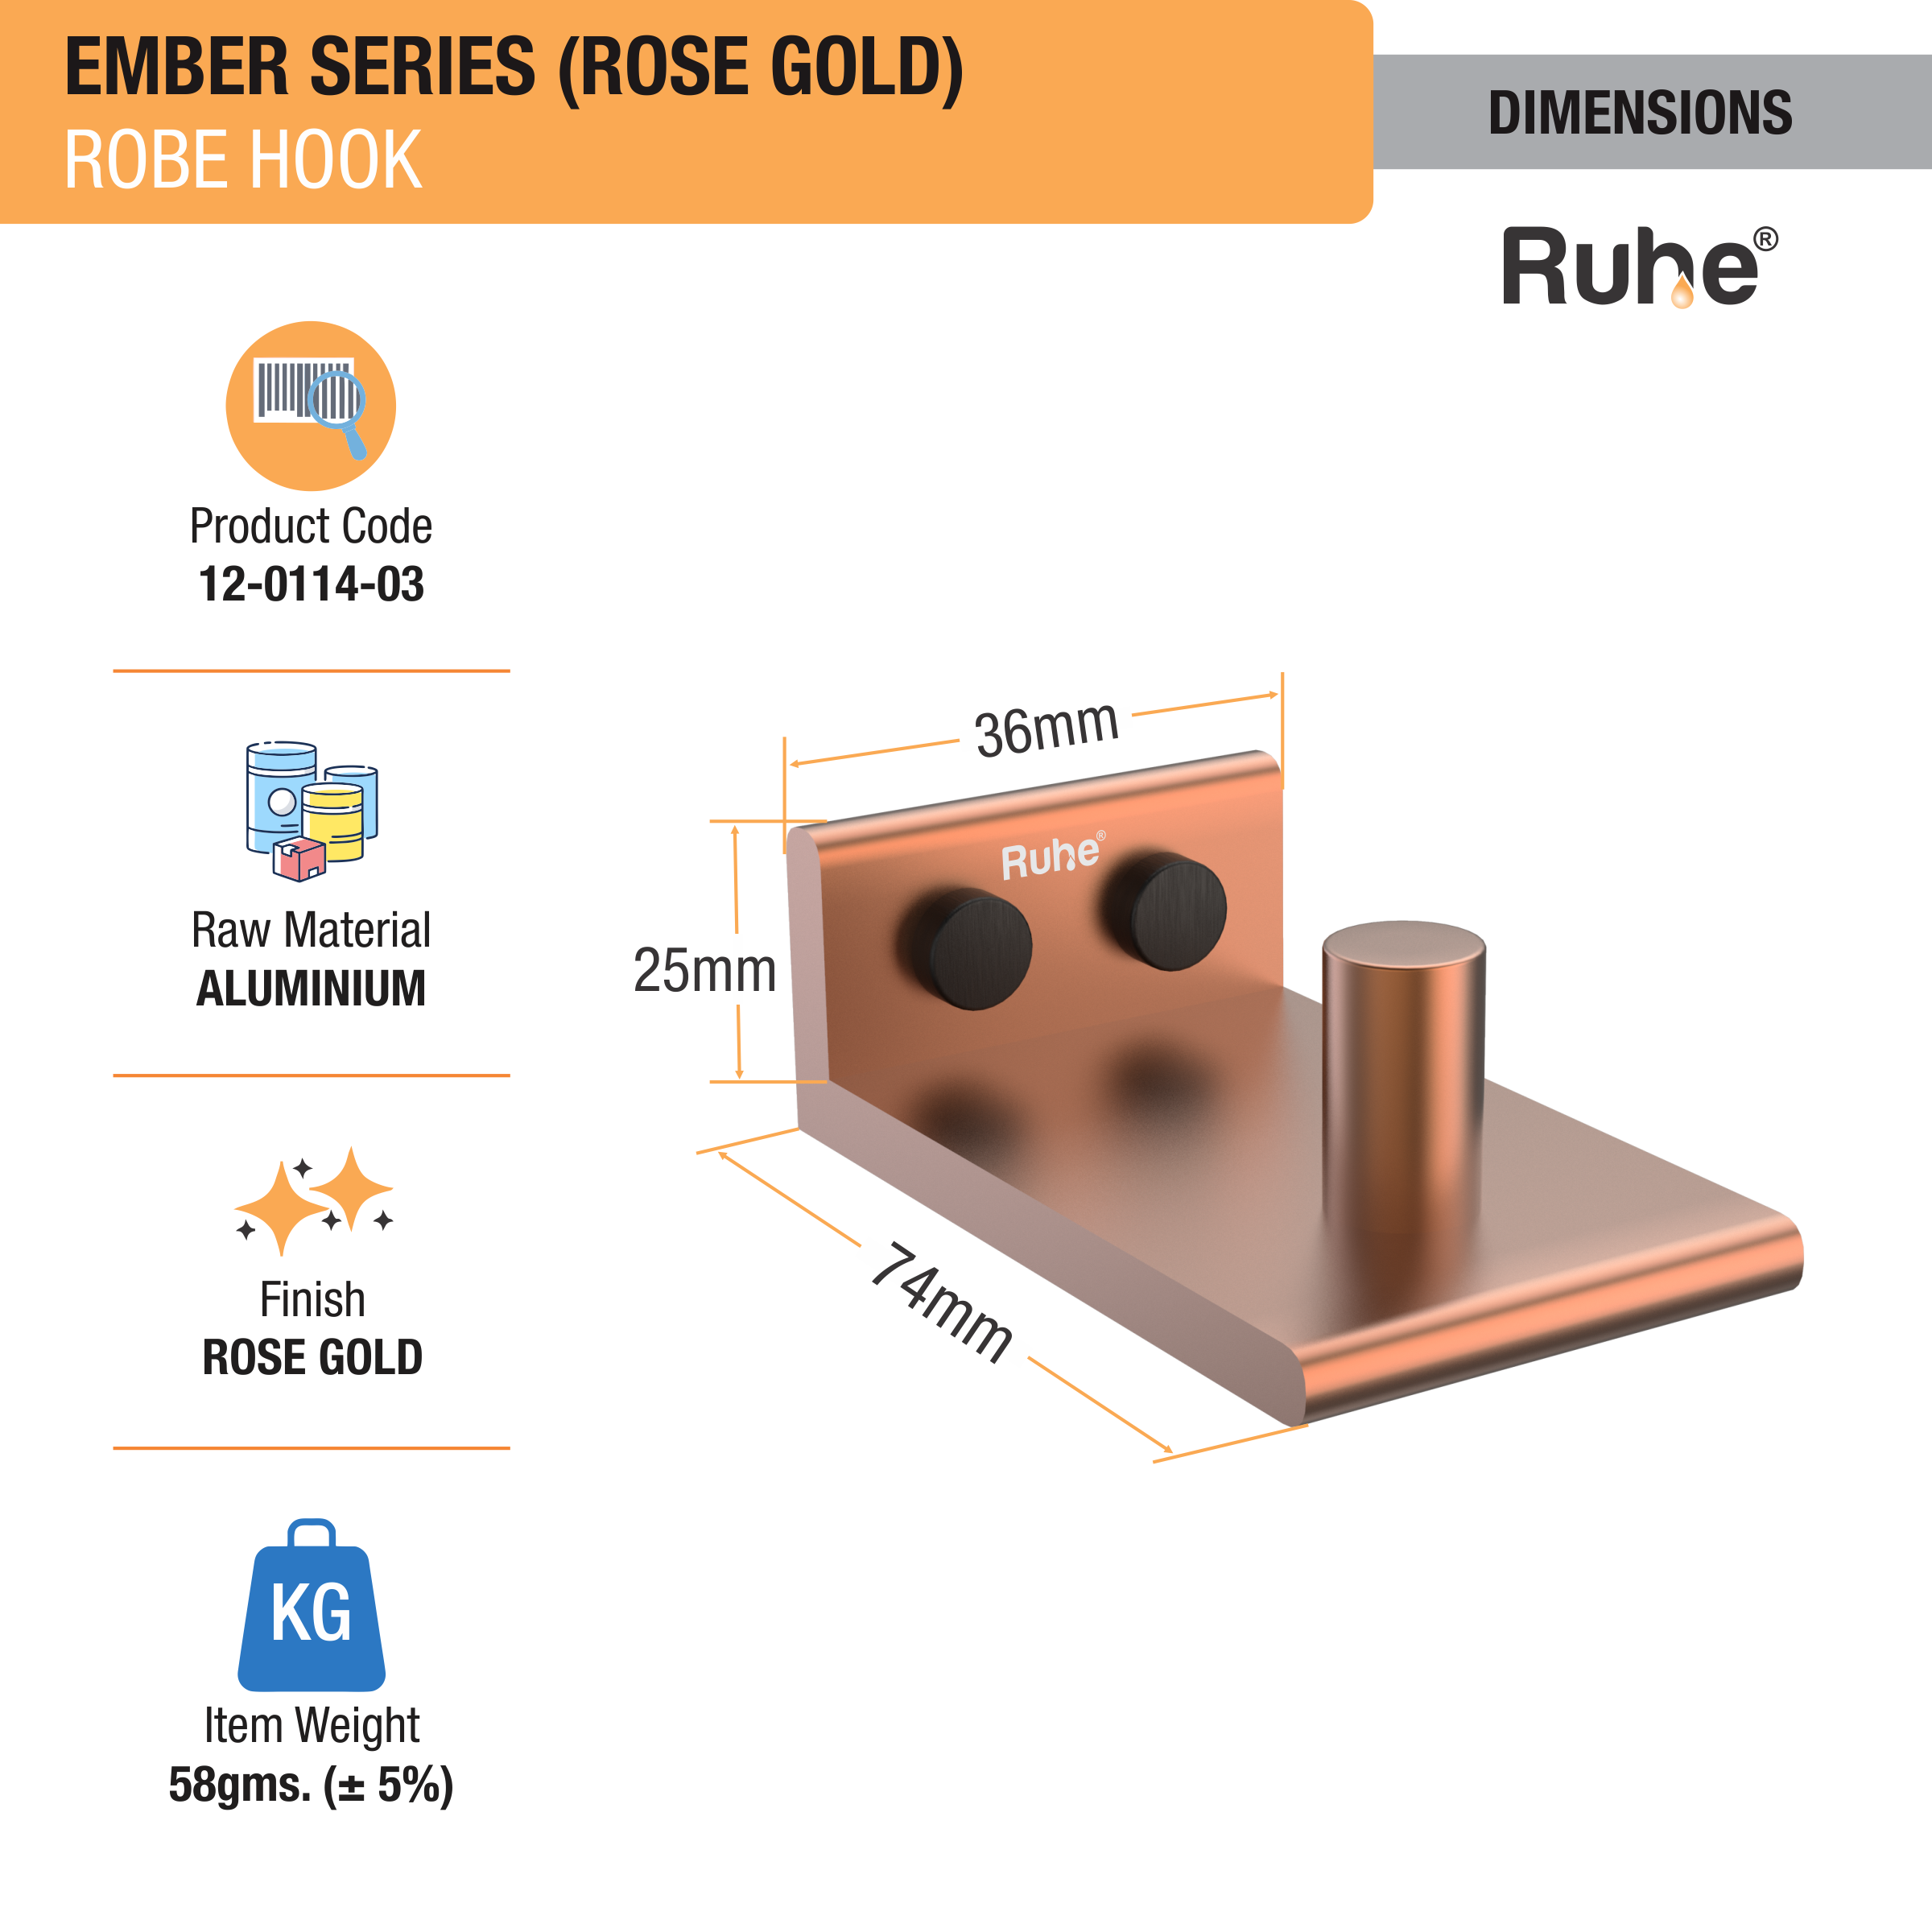 Ember Rose Gold Robe Hook (Space Aluminium) dimensions and sizes